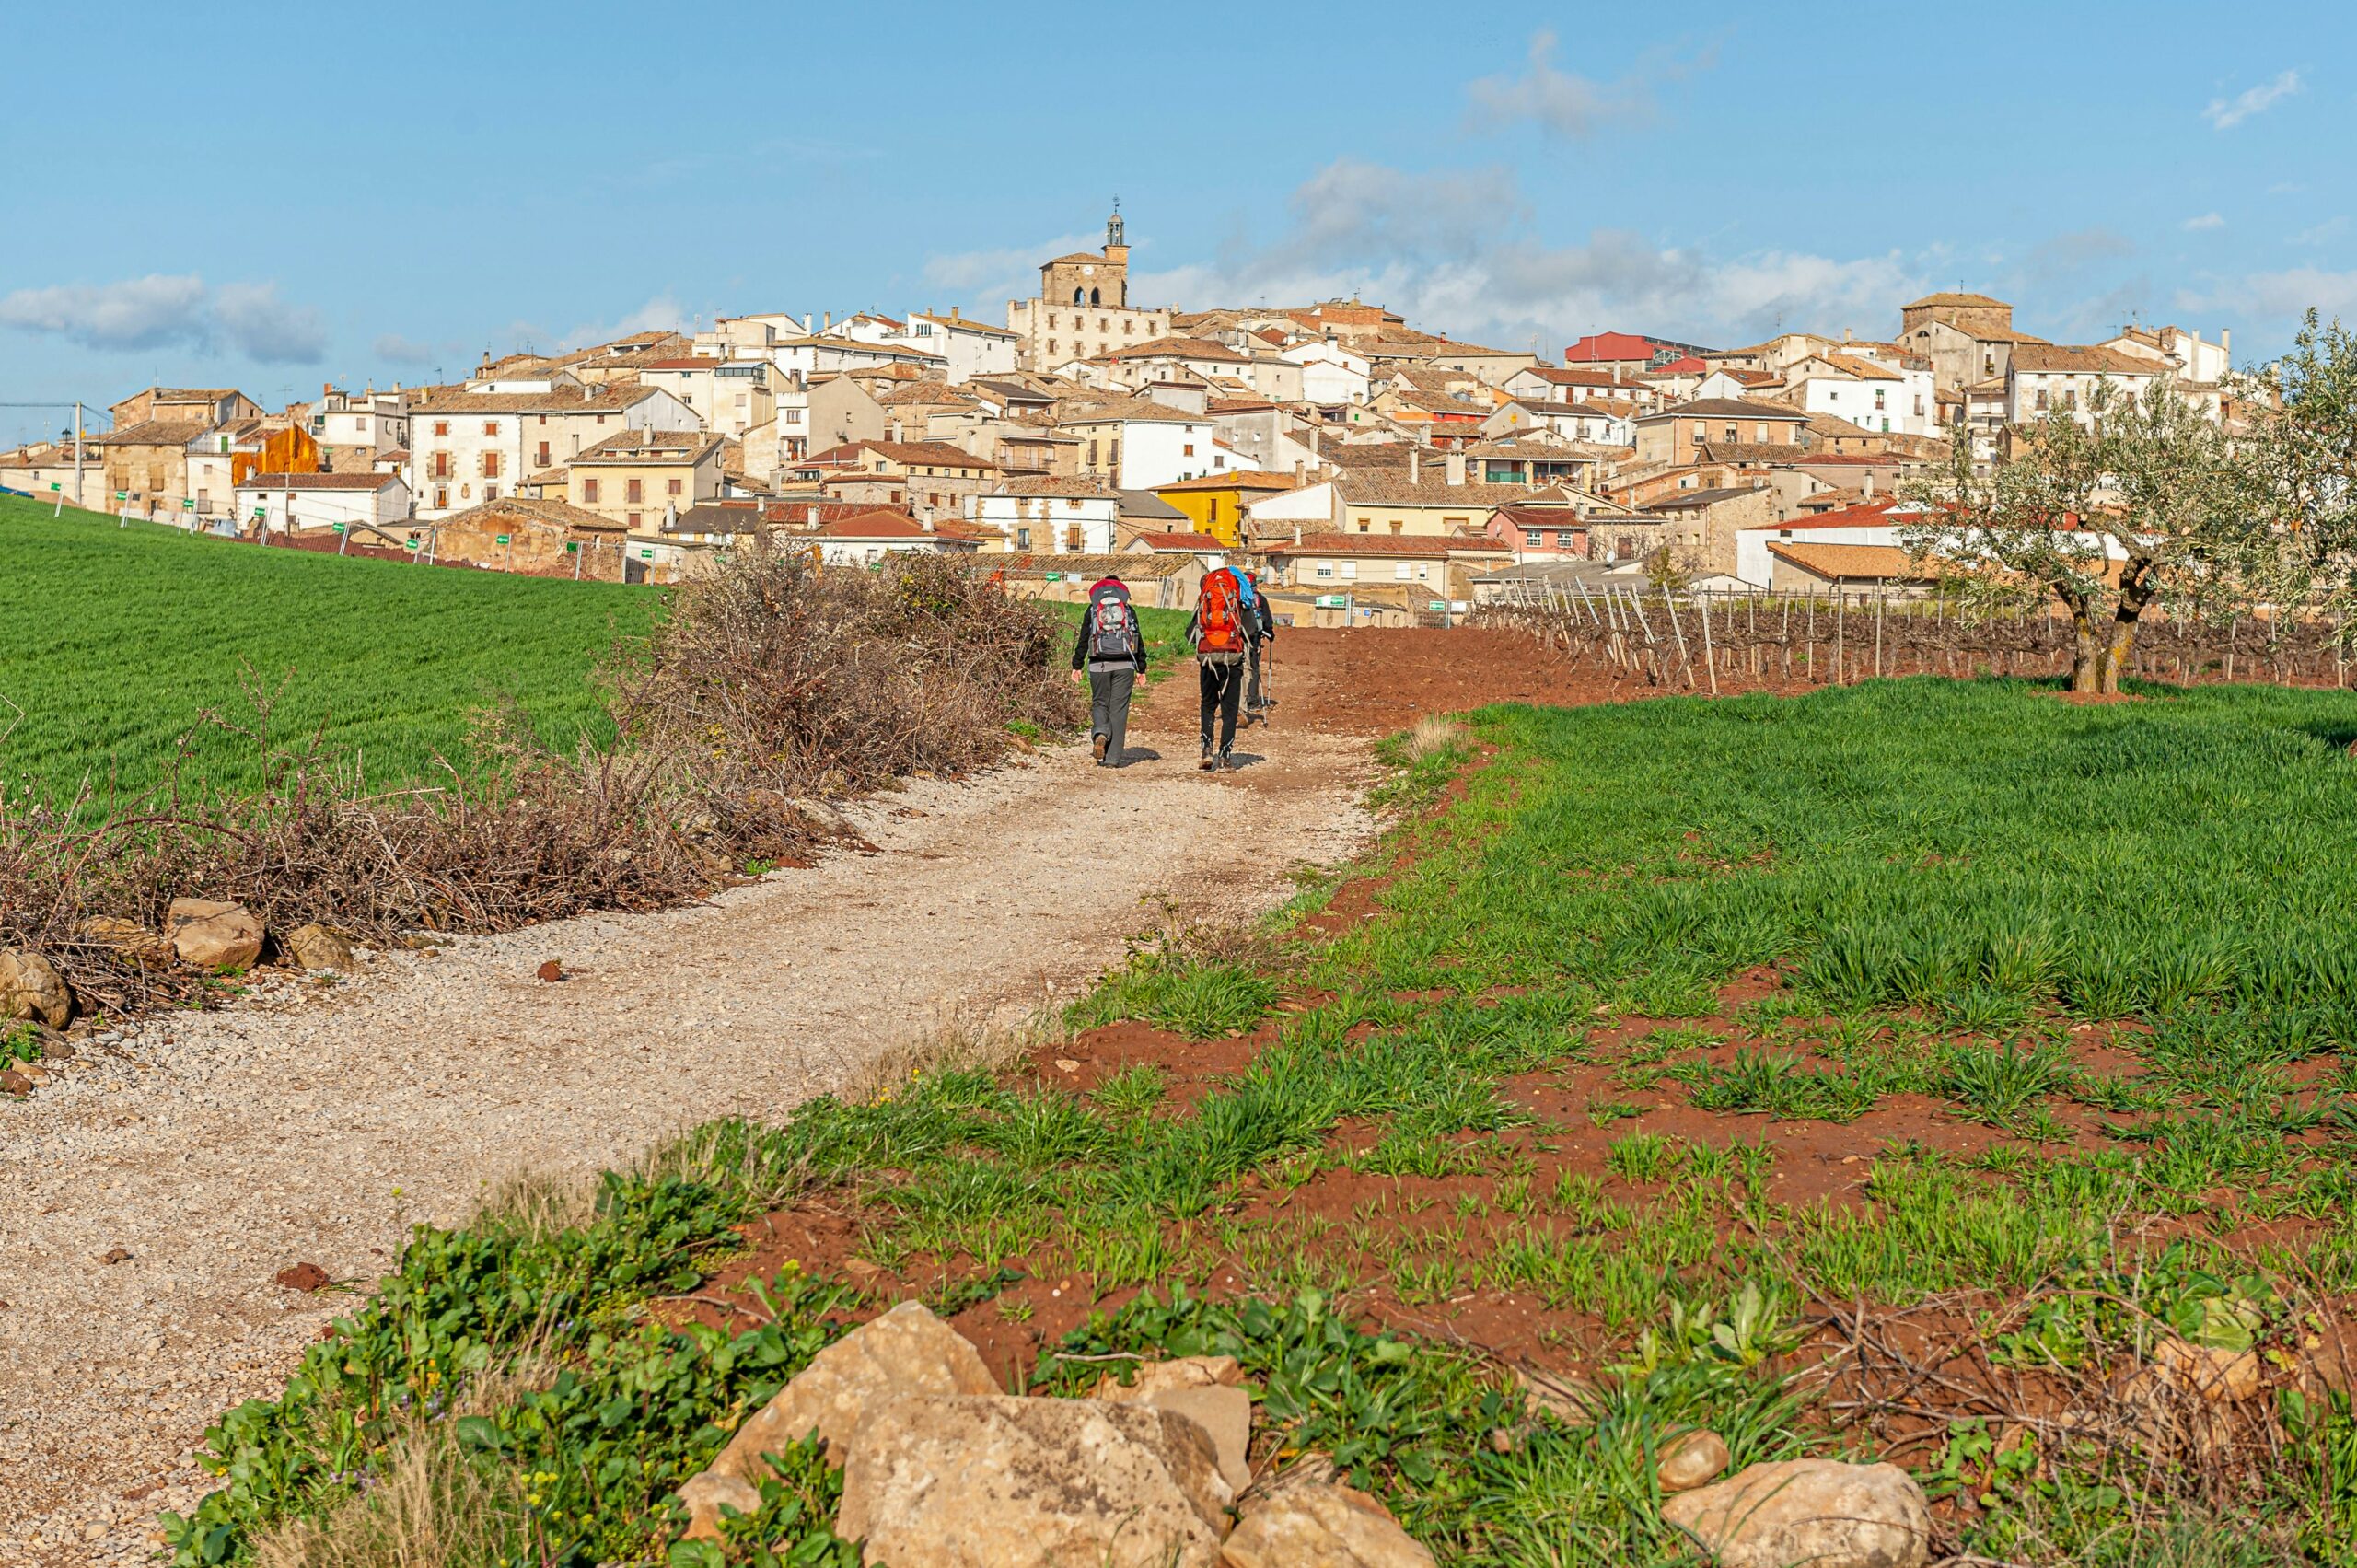 Two pilgrims walking along the historic Camino de Santiago trail, surrounded by lush greenery and the promise of spiritual discovery.